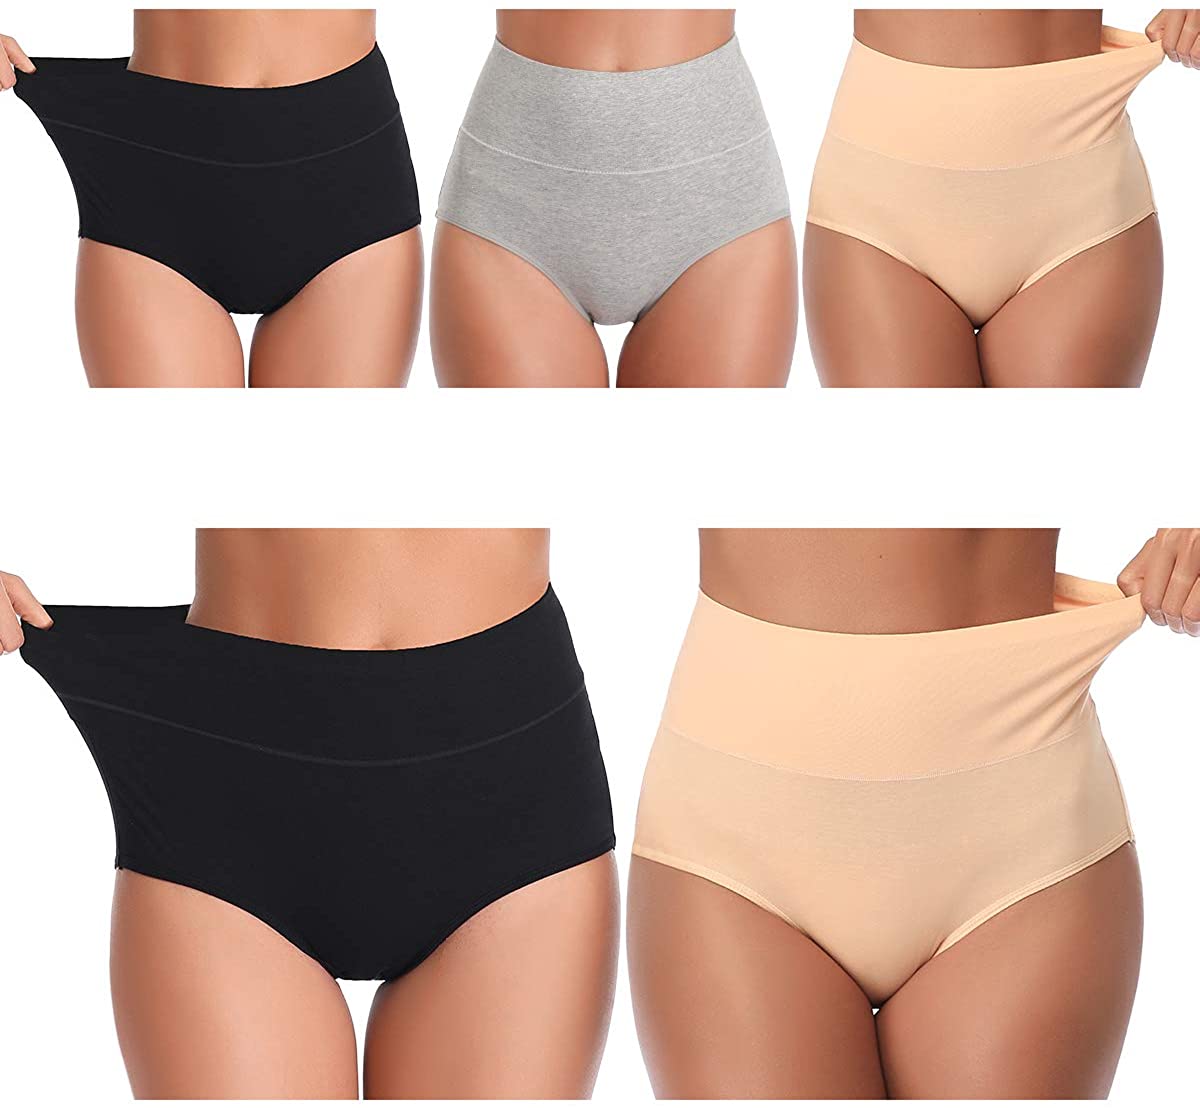 OUENZ Women's Cotton Underwear,Breathable Solid Comfortable High Waist Soft  Briefs Panties for Women, Multi-d-5 Pack, 3XL price in UAE,  UAE